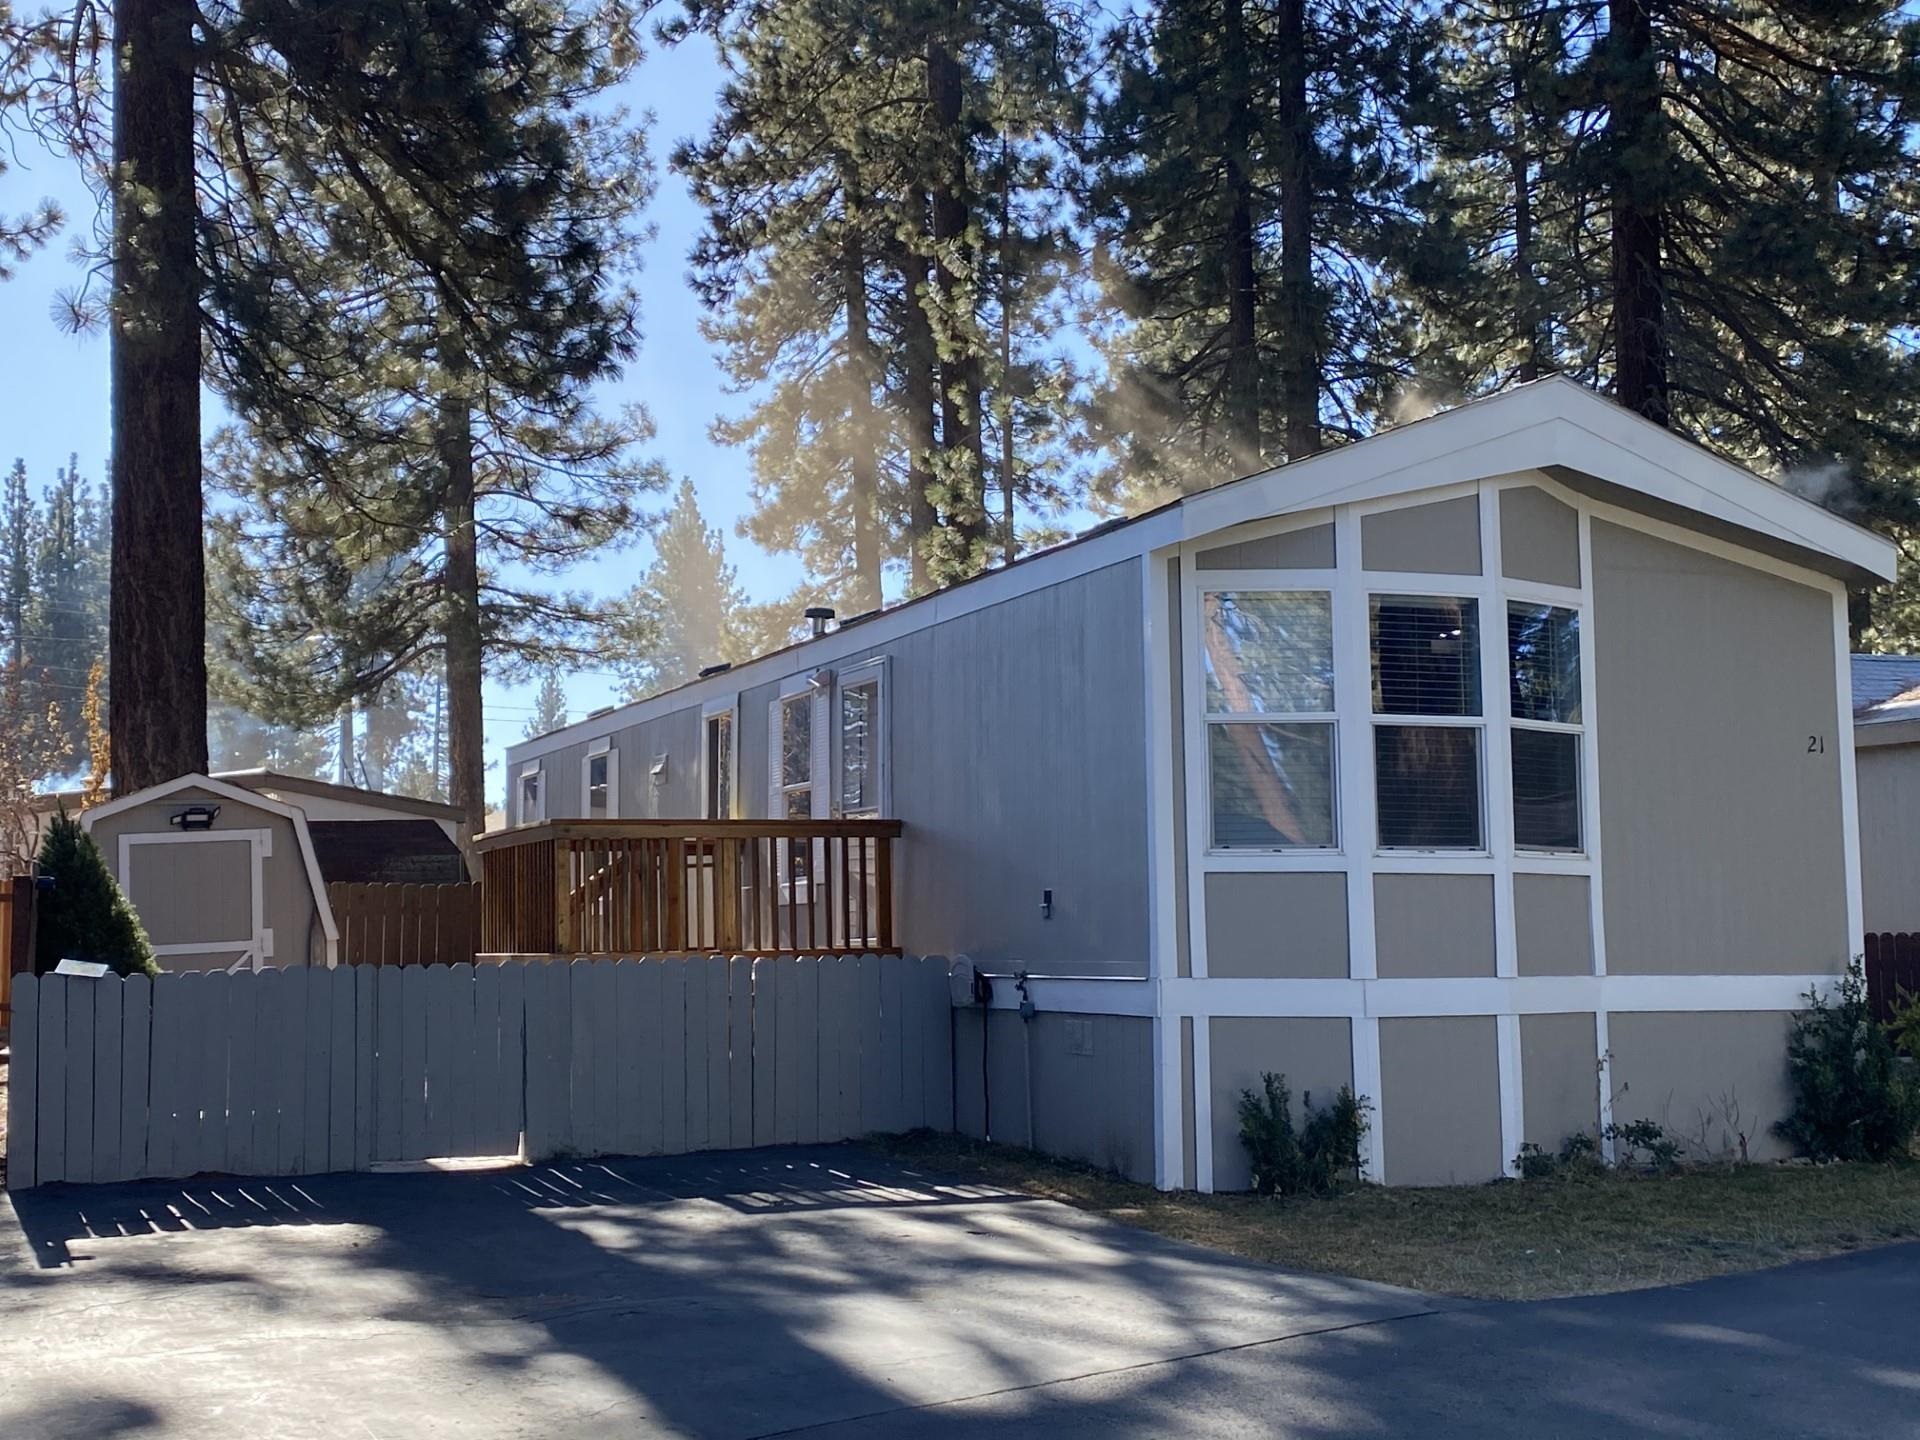 Image for 10100 #21 Pioneer Trail, Truckee, CA 96161-2952